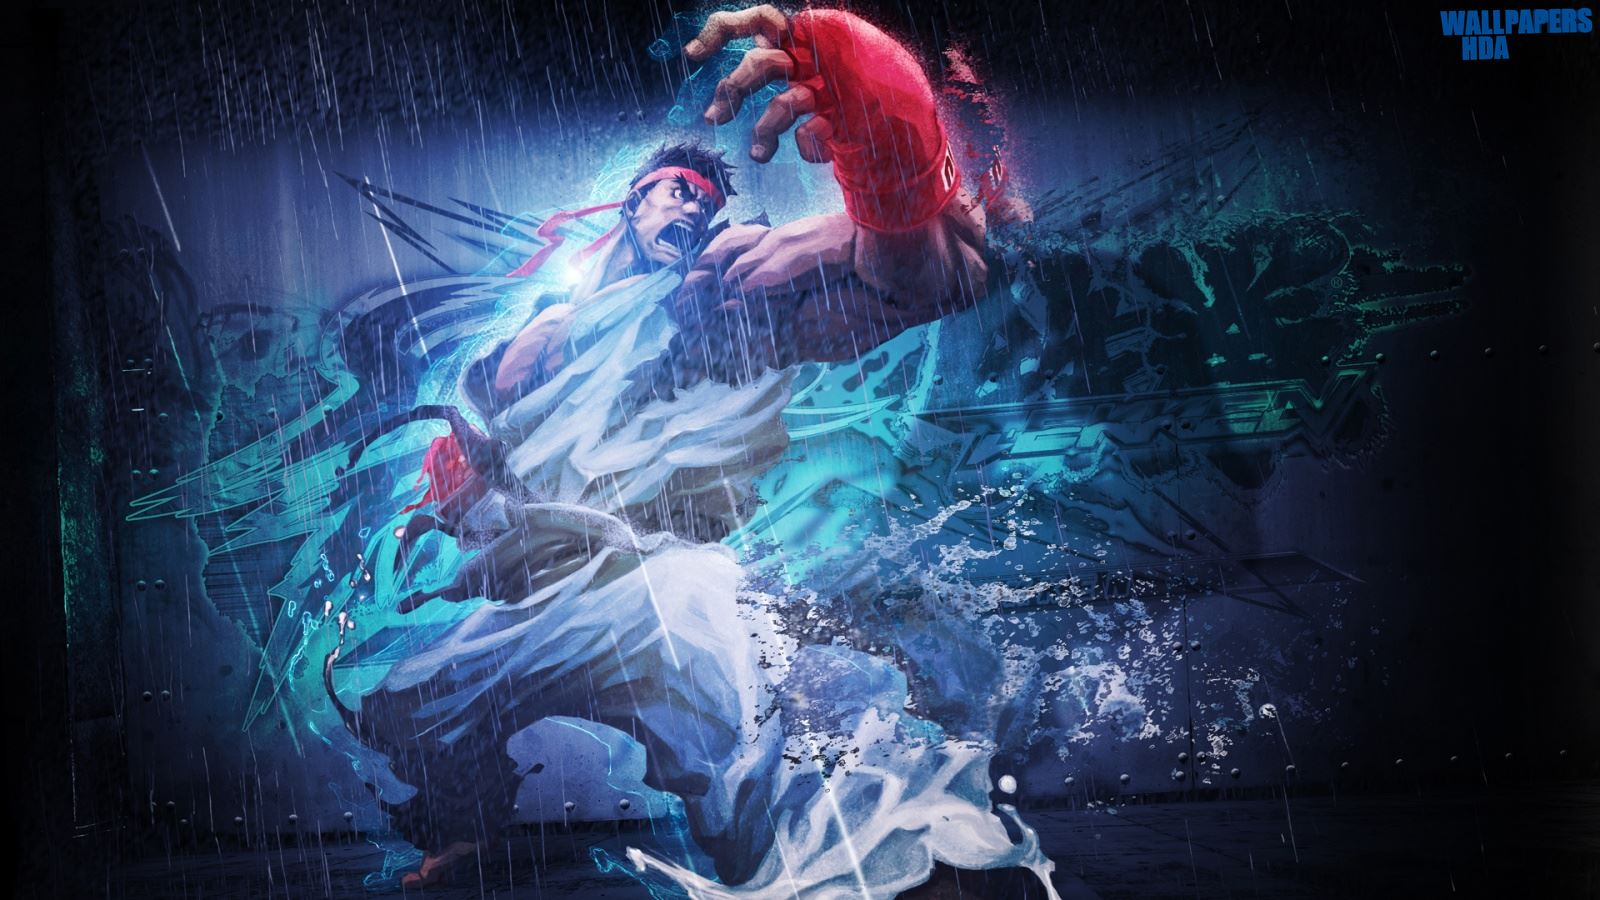 Ryu in the street fighter 1600x900